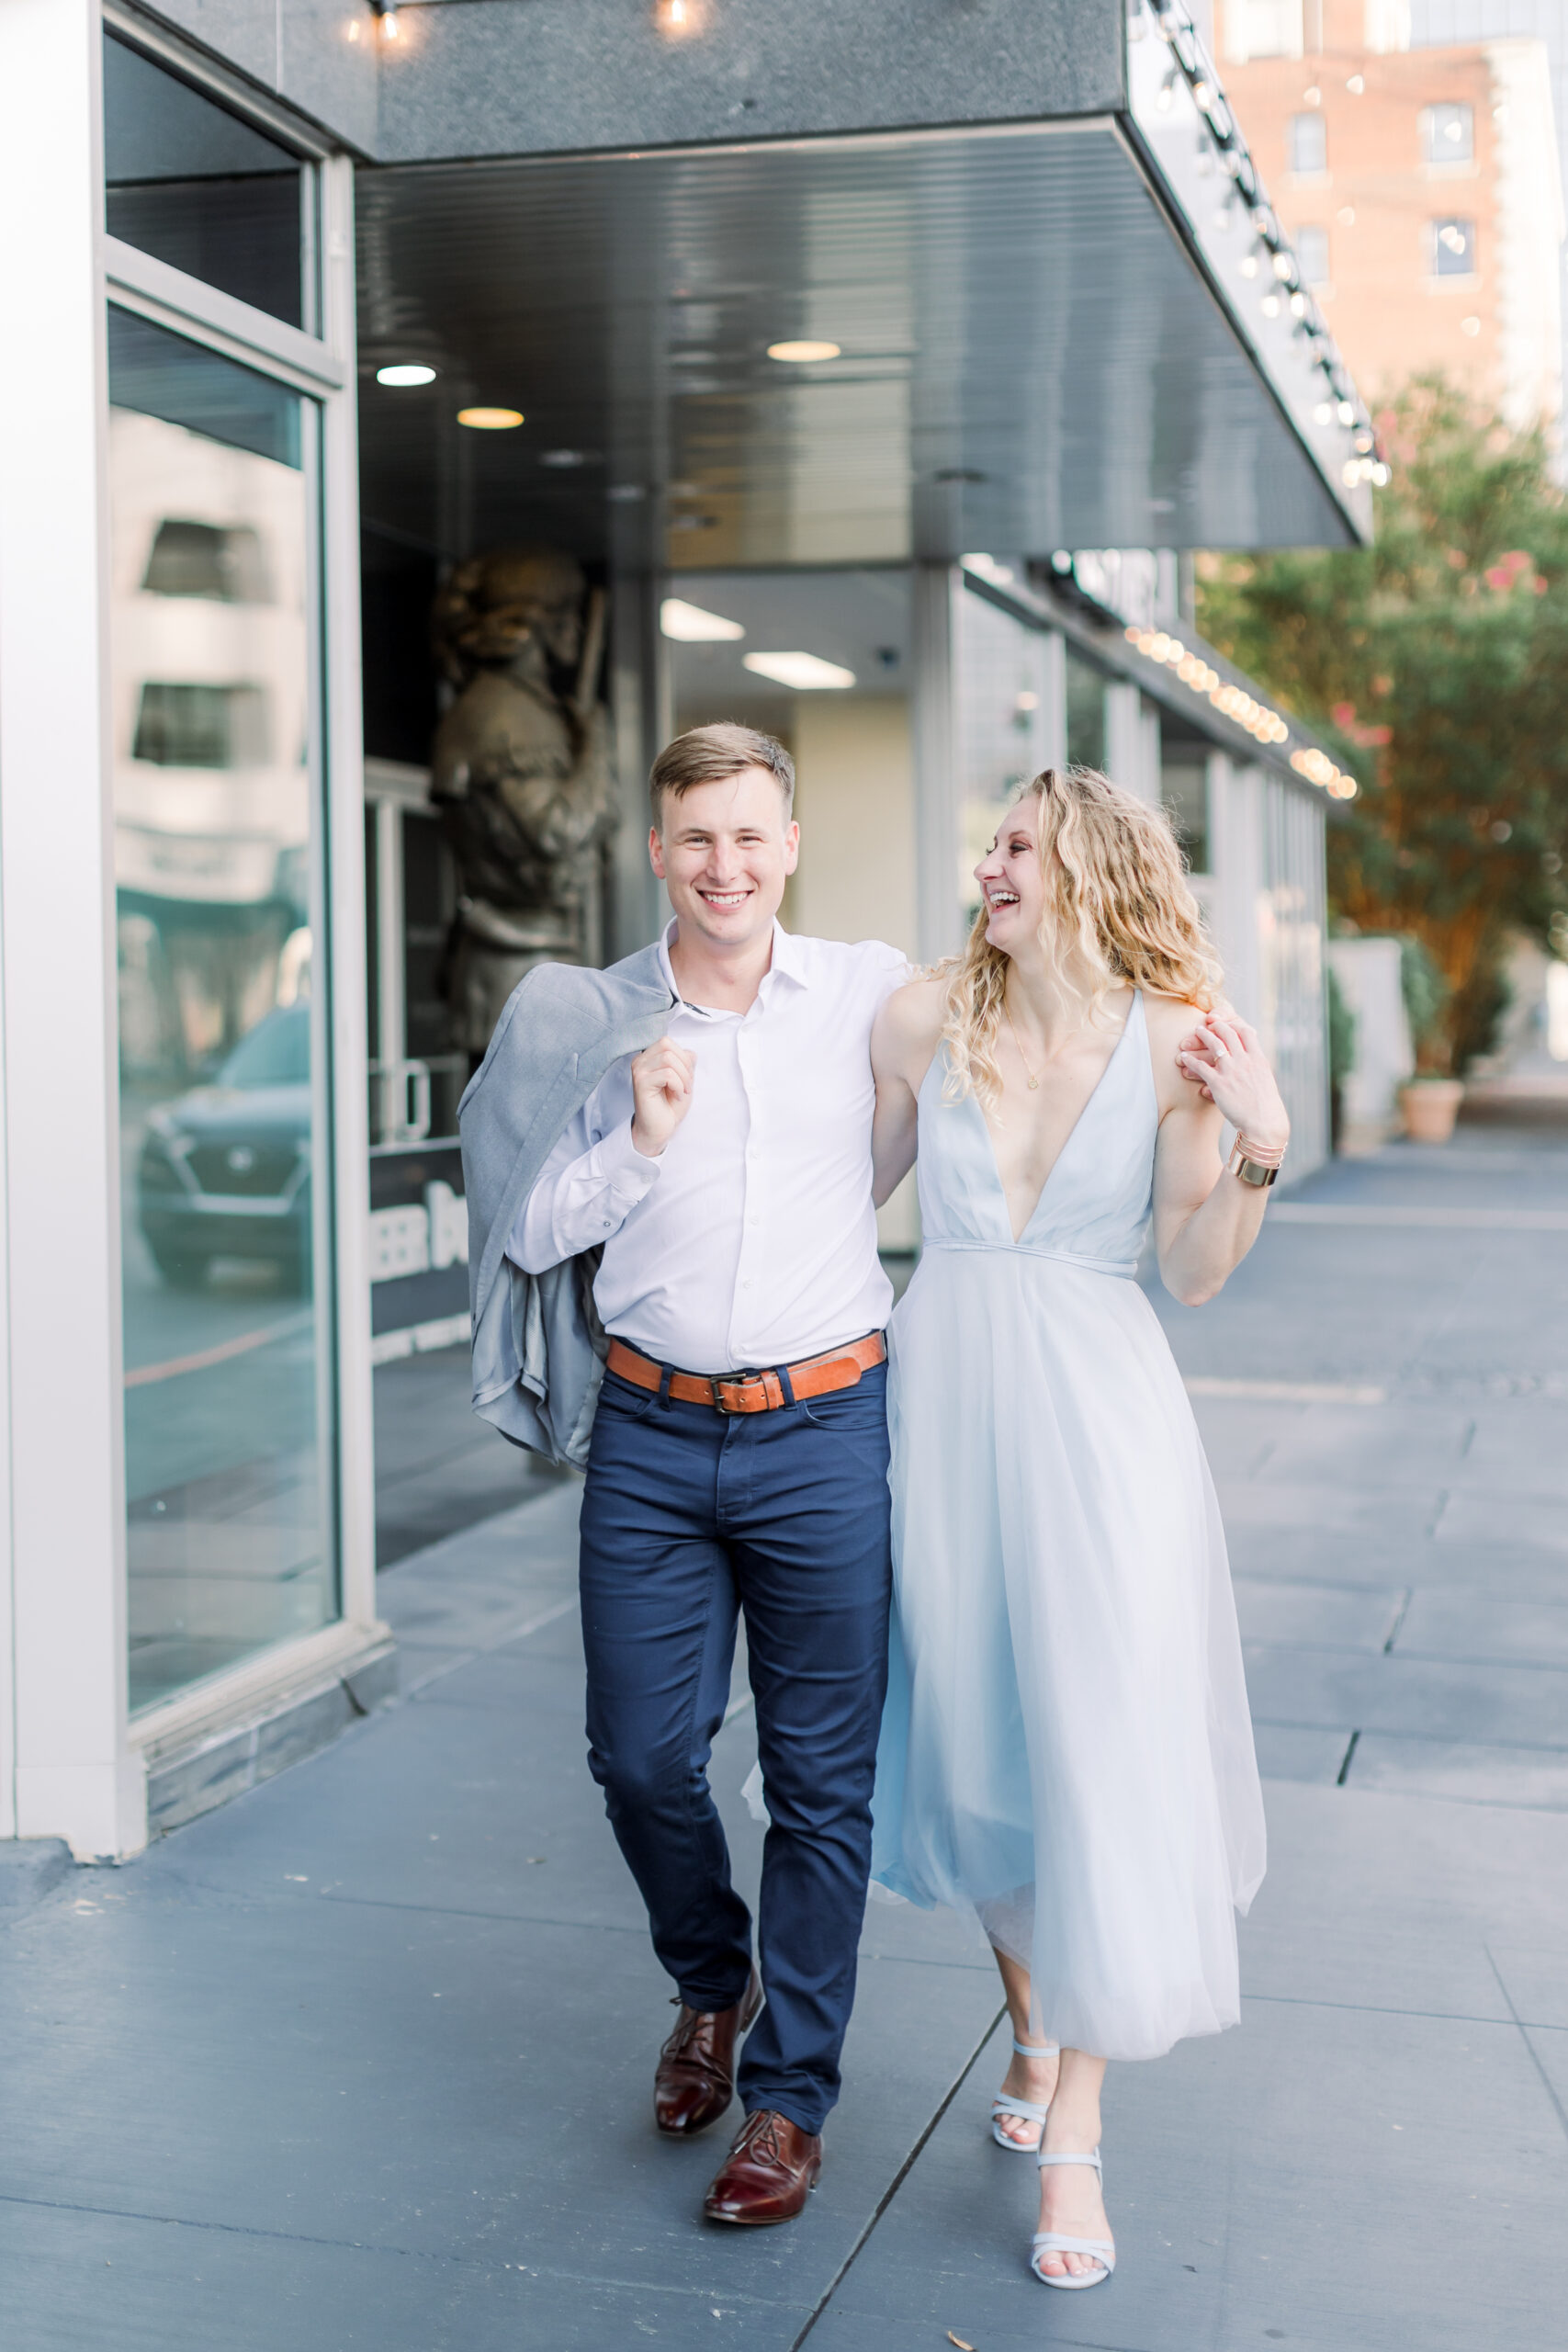 engagement photo shoot in west village chattanooga by chattanooga photographer alyssa rachelle photography